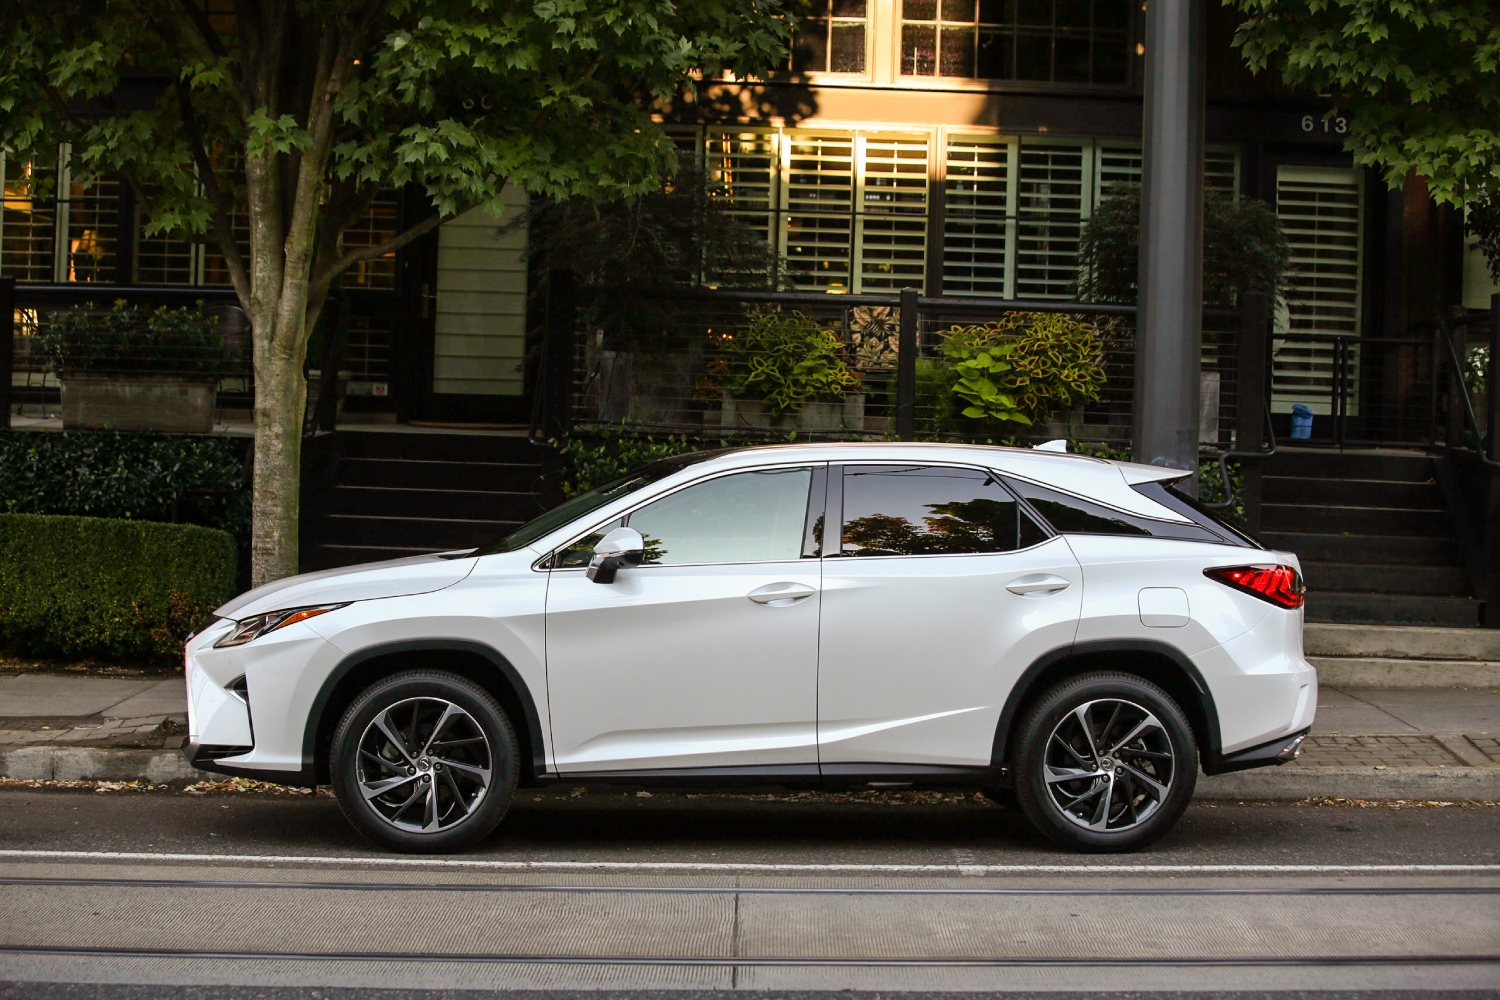 The best used Lexus RX SUV years include this 2018 version